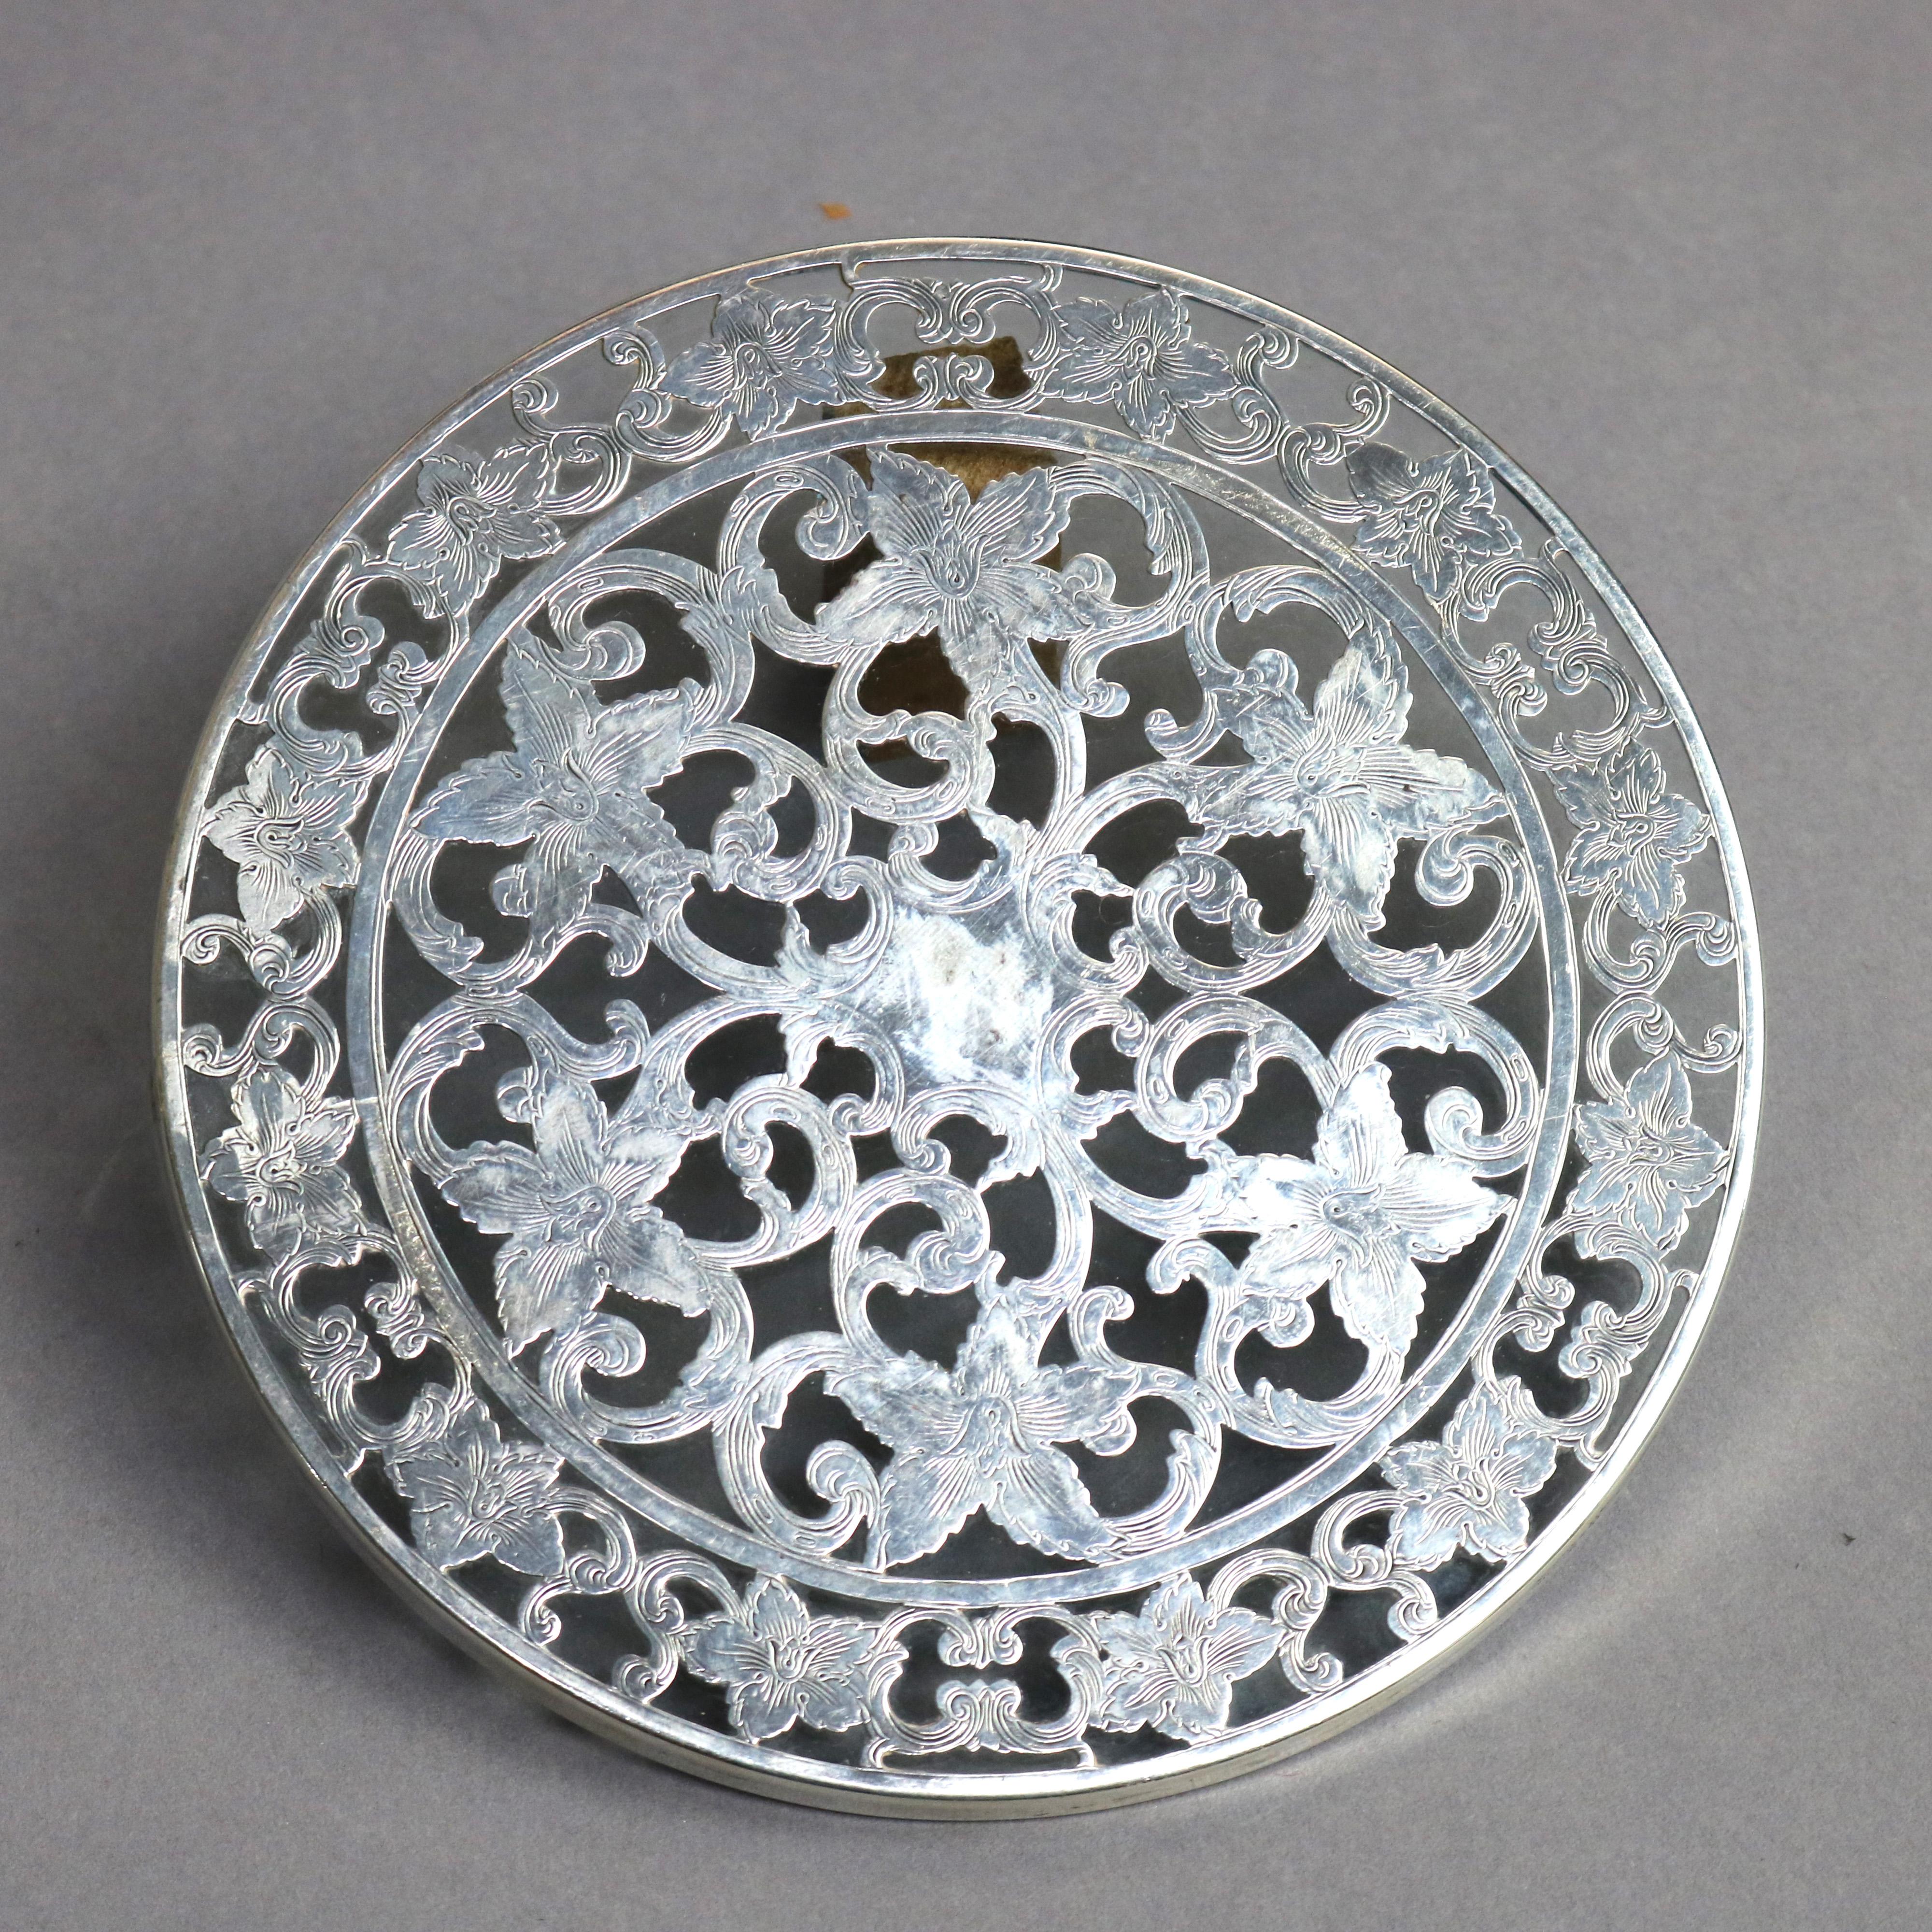 Three antique glass trivets offer reticulated sterling silver overlay with scroll and foliate design, circa 1890

Measures- (1)- 0.25